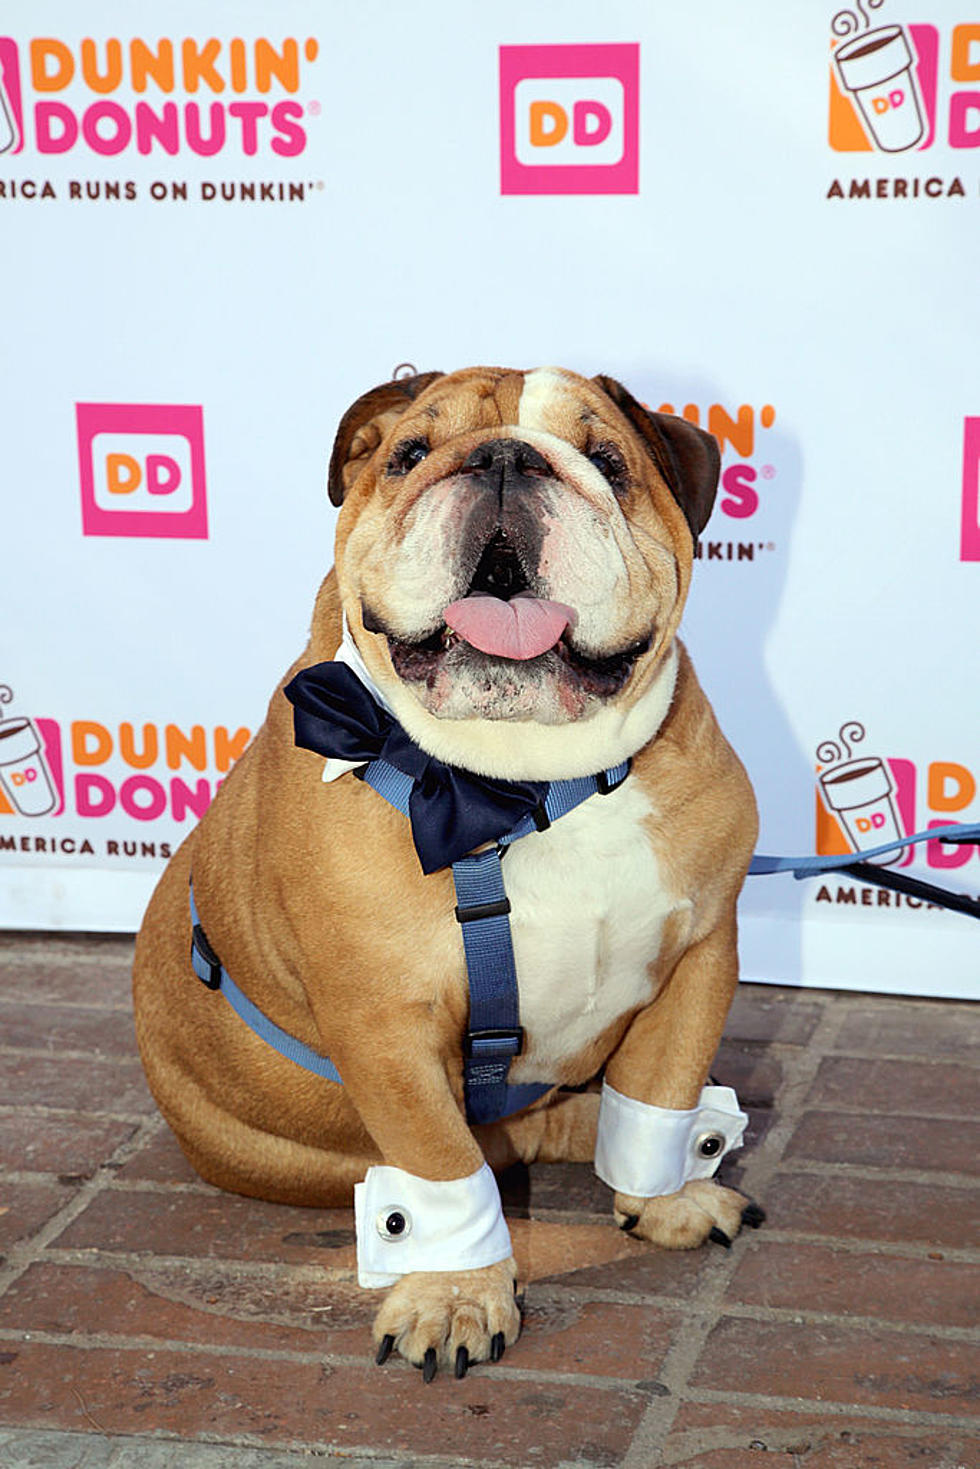 $1 Doggie Treat from Dunkin’…”Cup for Pup” available next week.